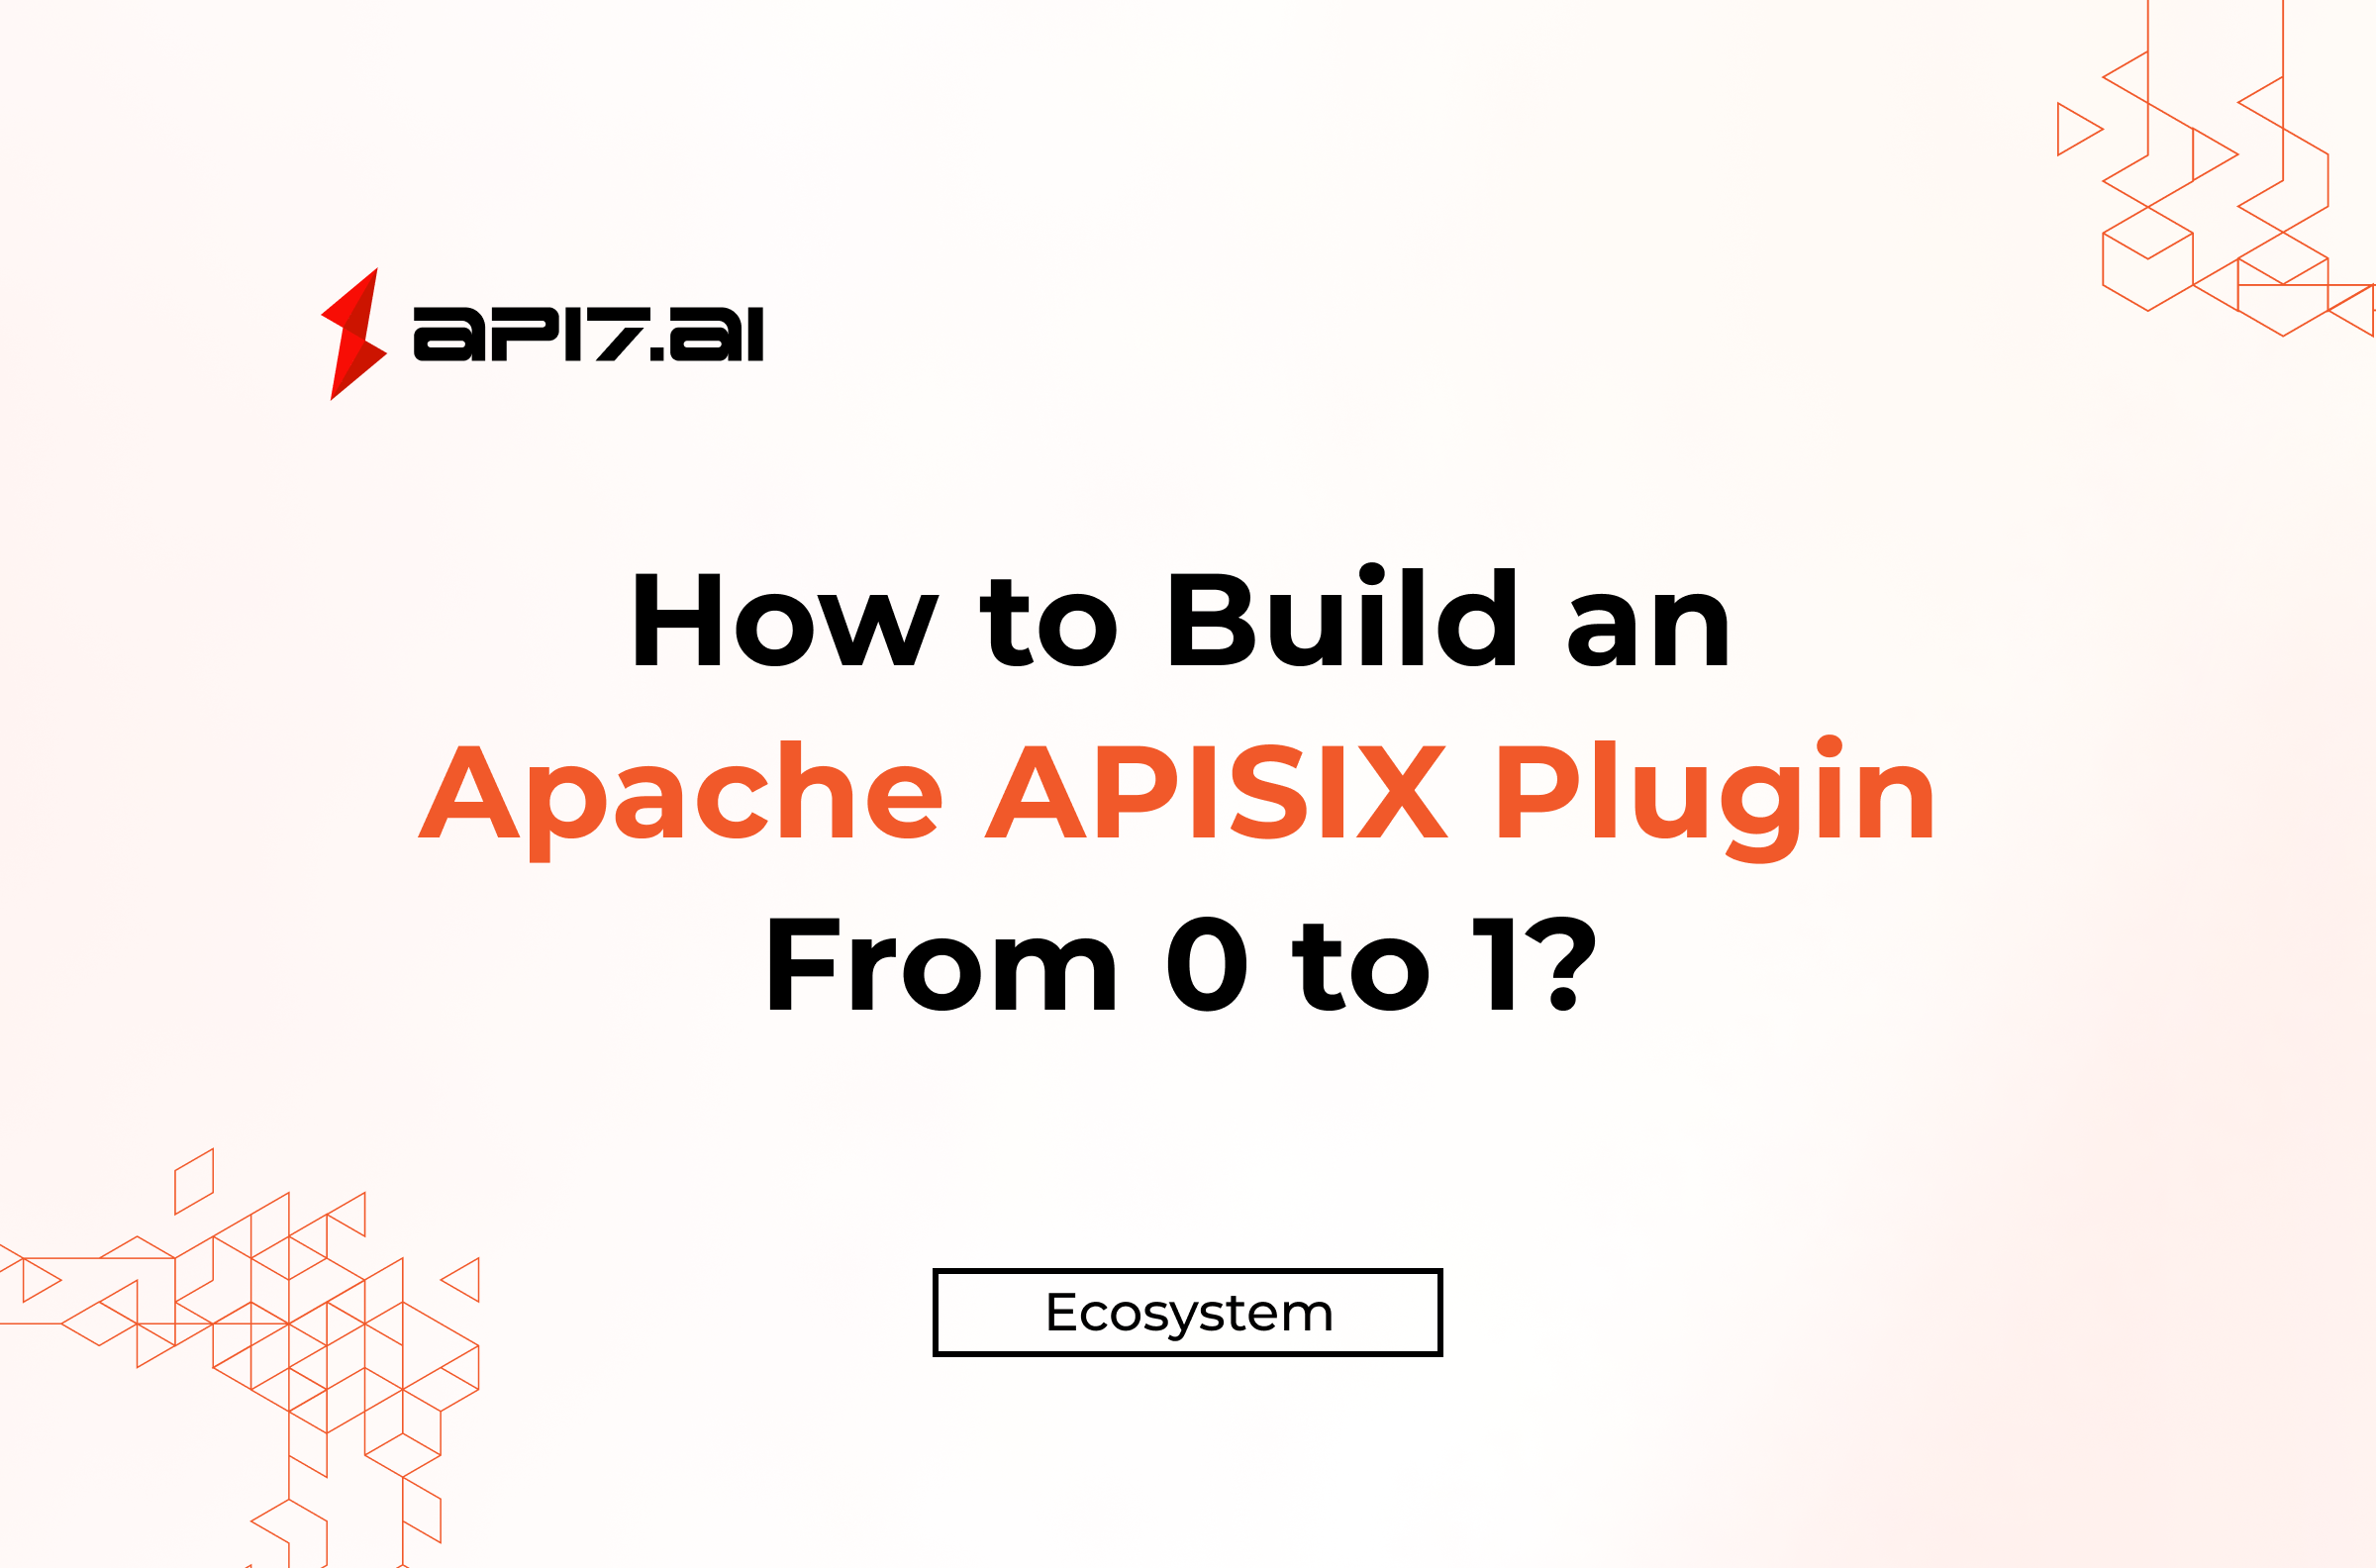 How to Build an Apache APISIX Plugin From 0 to 1?